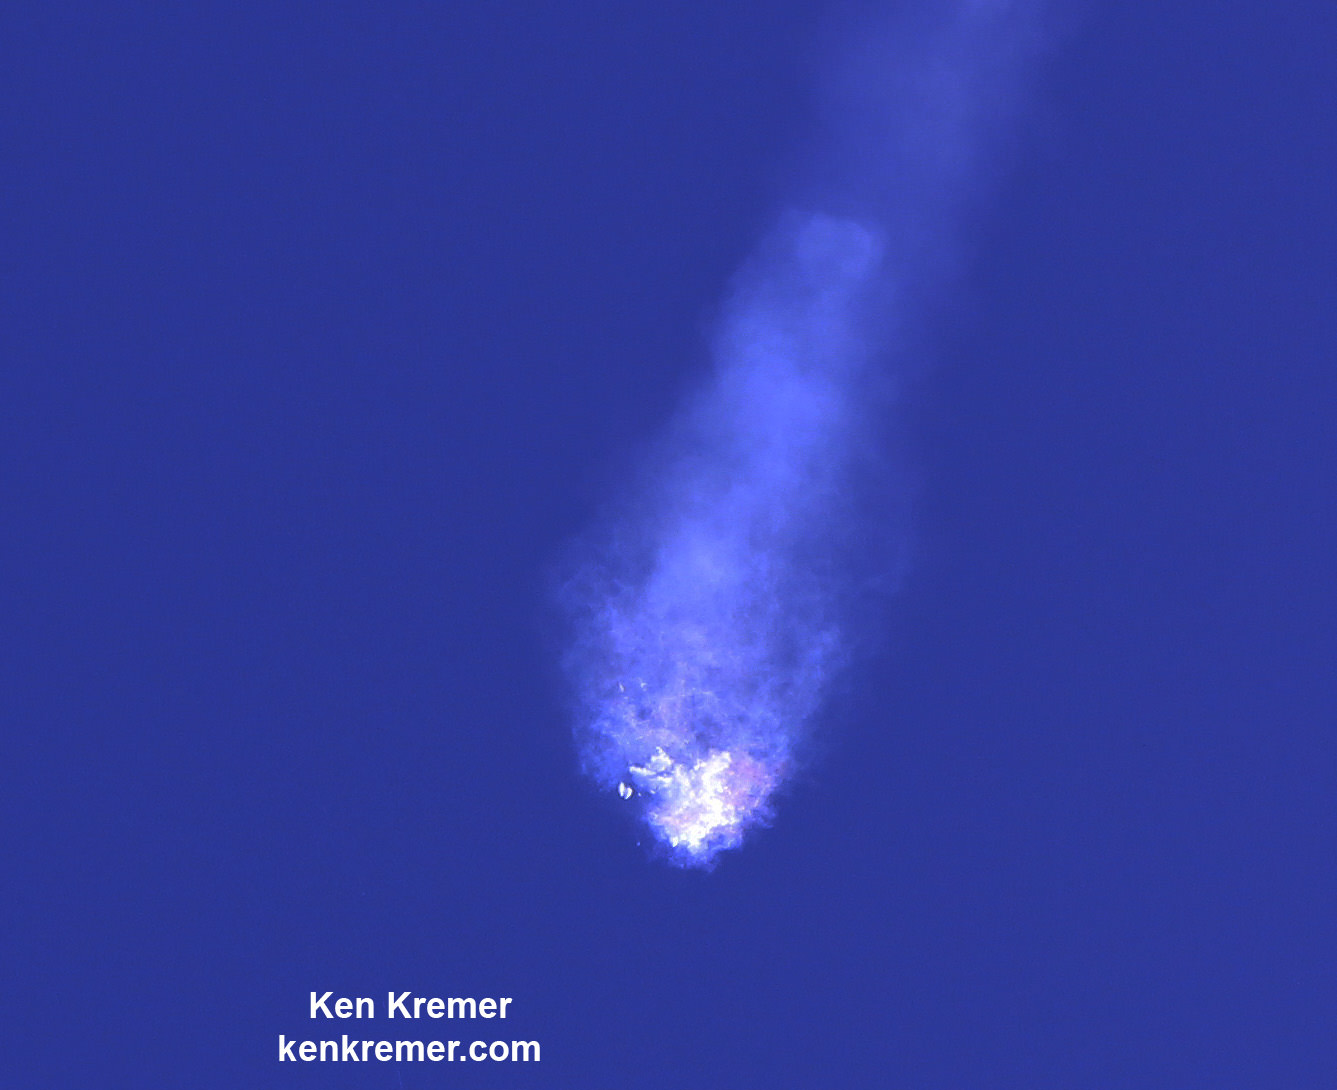 SpaceX Falcon 9 rocket and Dragon resupply spaceship explode about 2 minutes after liftoff from Cape Canaveral Air Force Station in Florida on June 28, 2015. Credit: Ken Kremer/kenkremer.com